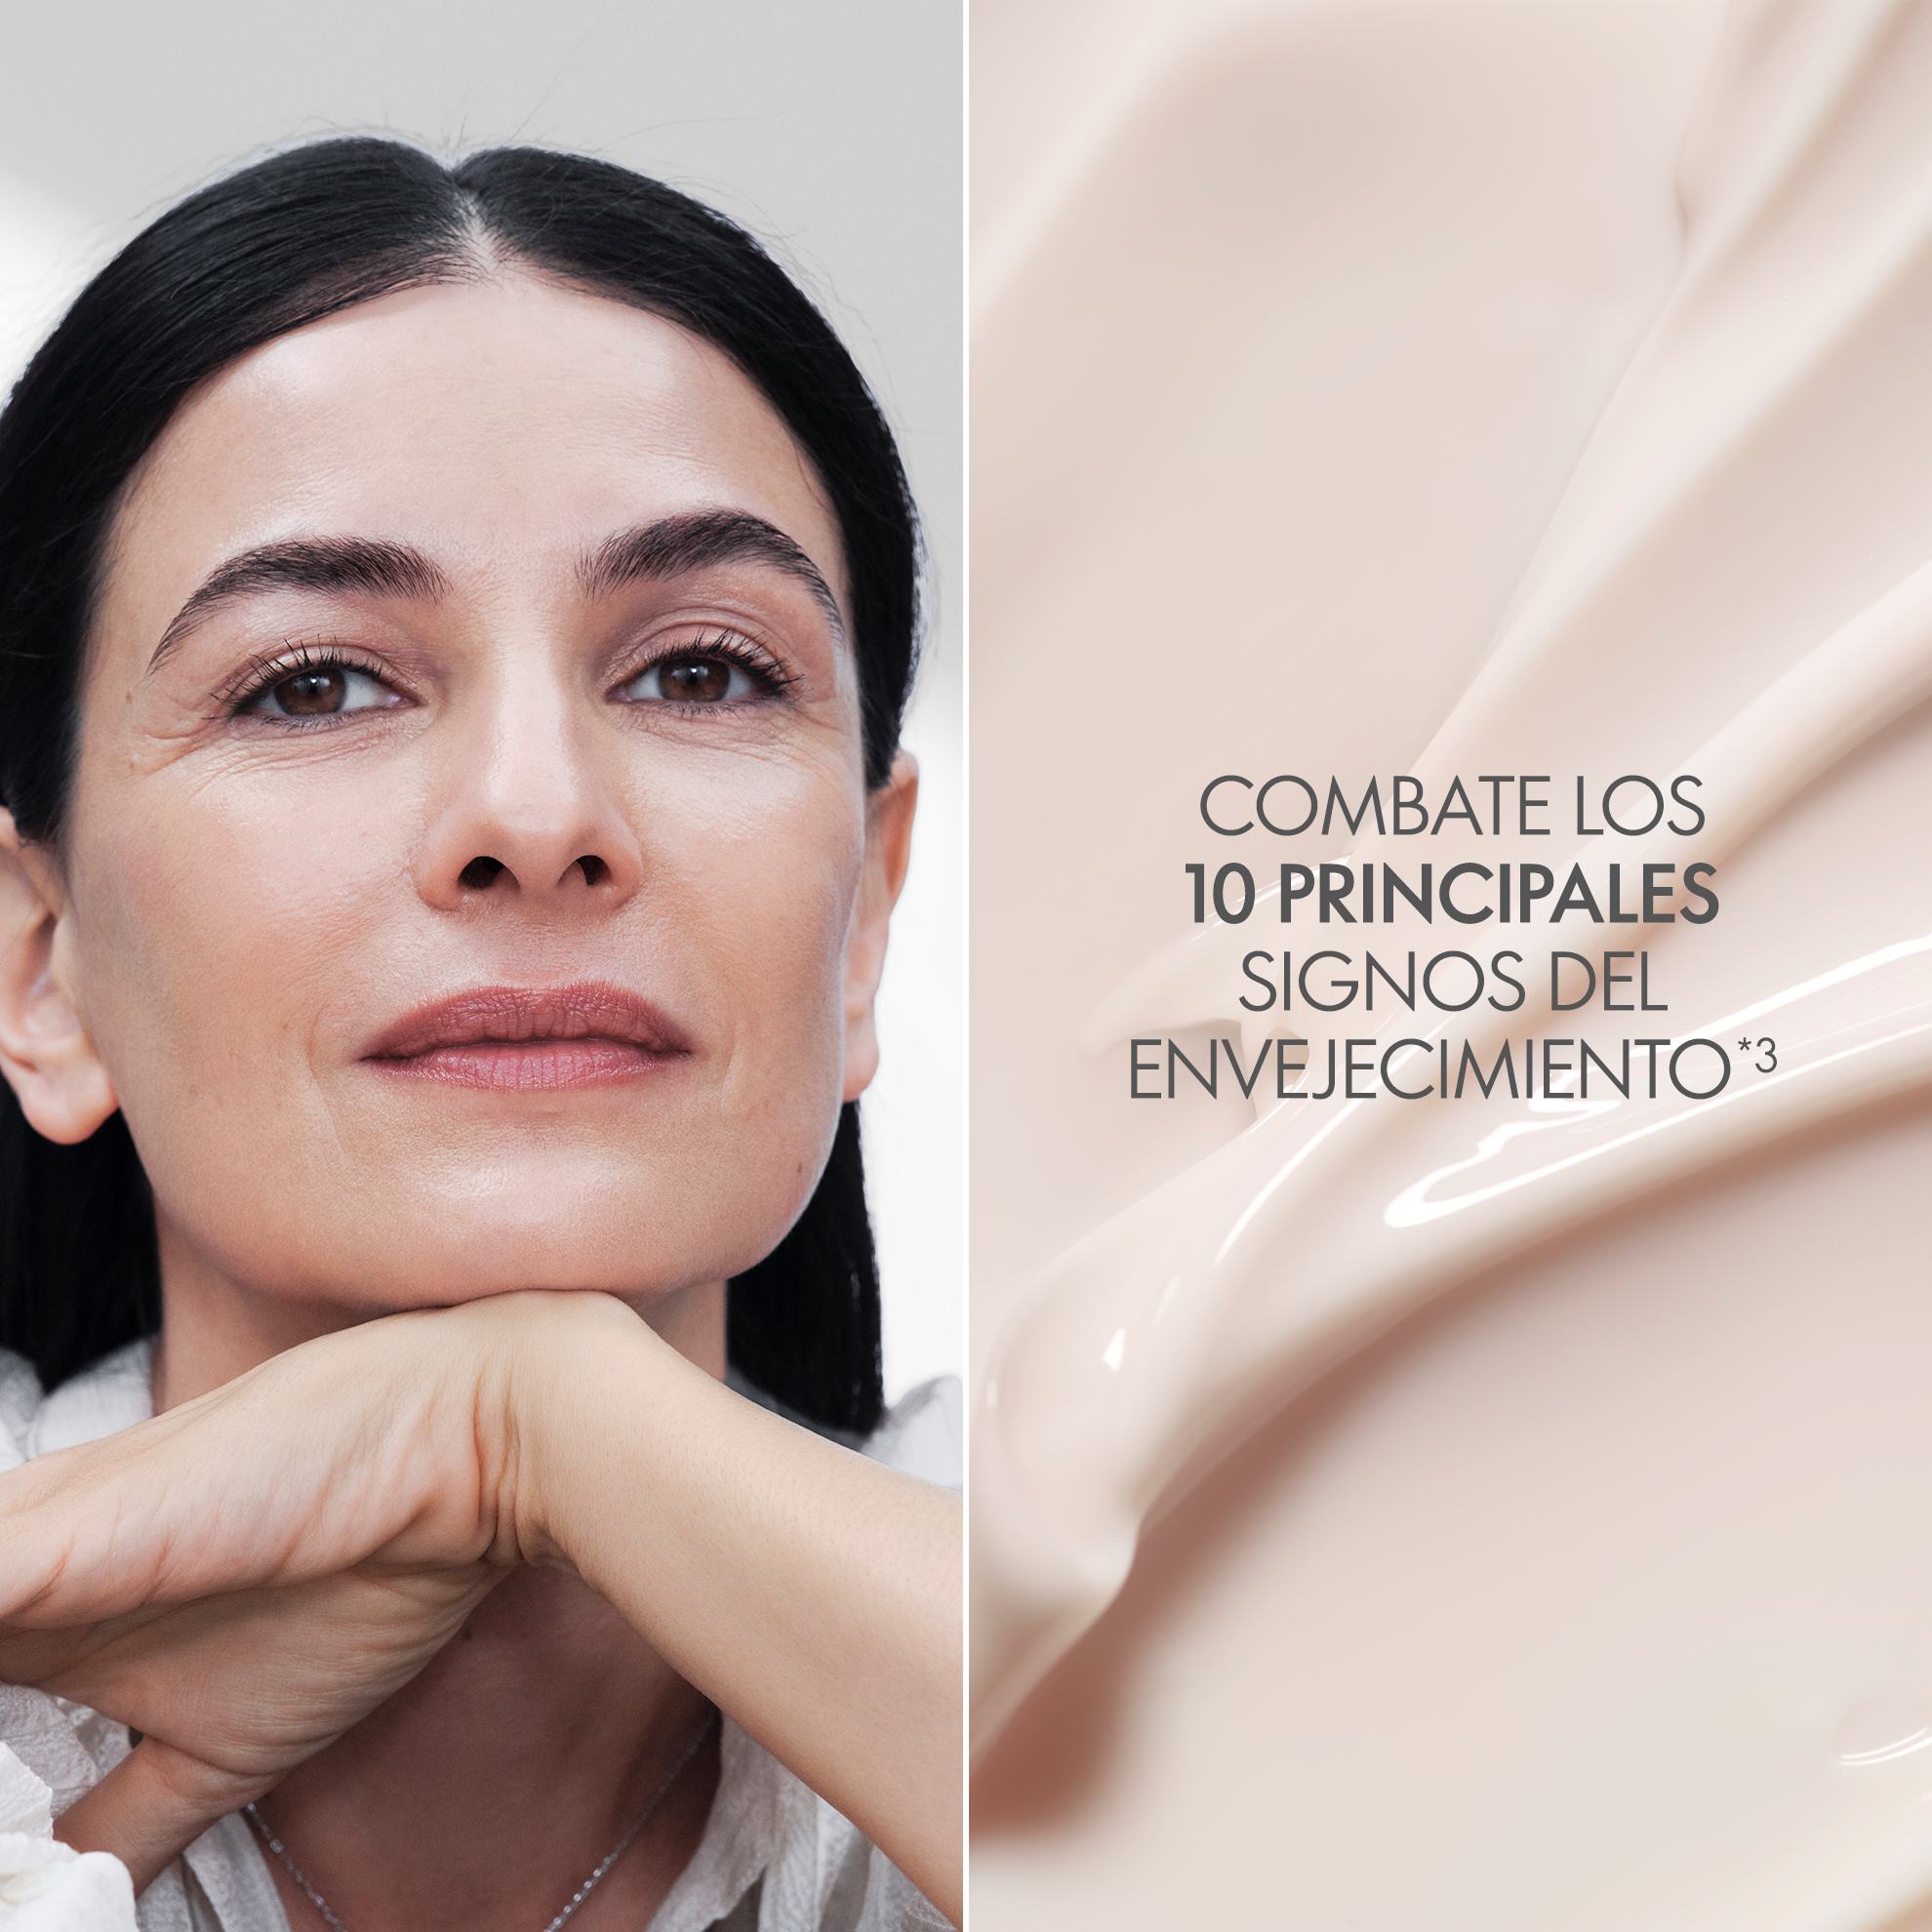 https://media-cdn.oriflame.com/productImage?externalMediaId=product-management-media%2fProducts%2f41058%2fCL%2f41058_2.png&id=18234953&version=1